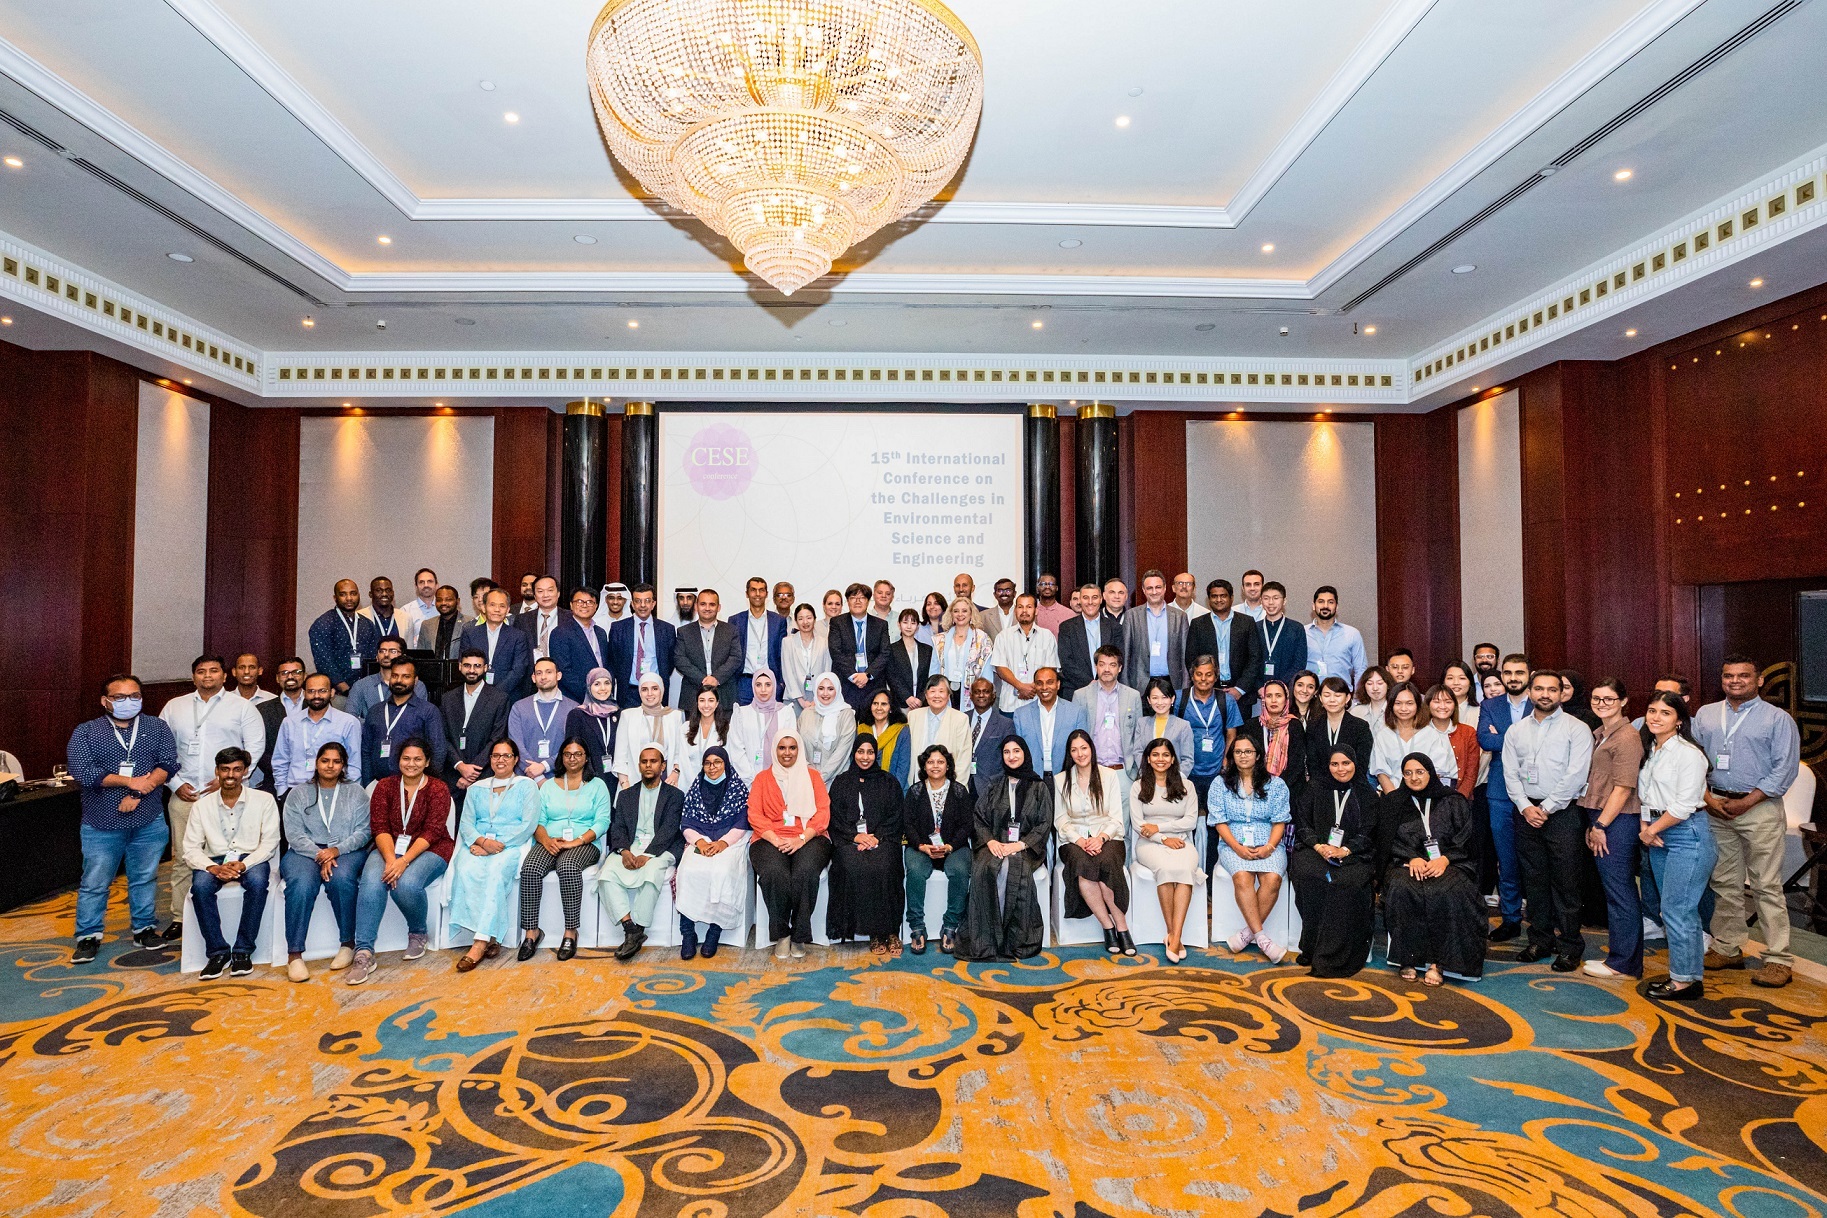 Dubai hosts the 15th International Conference on Challenges in Environmental Science and Engineering 2022 for the first time in the Middle East – EQ Mag